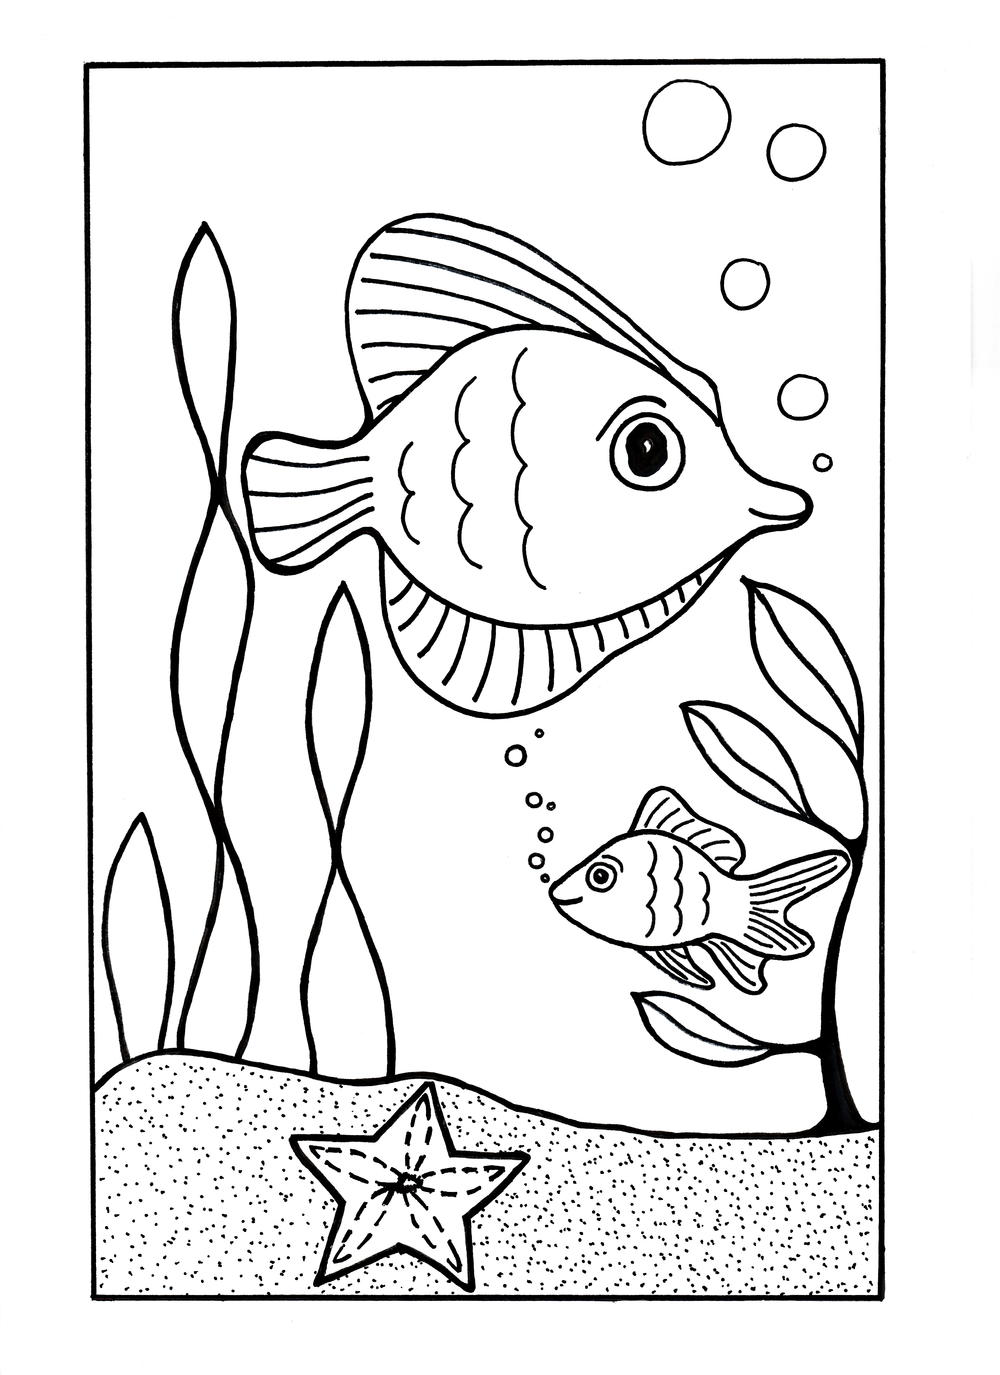 Under The Sea Coloring Page ExtraLarge1000 ID 2174388 ?v=2174388